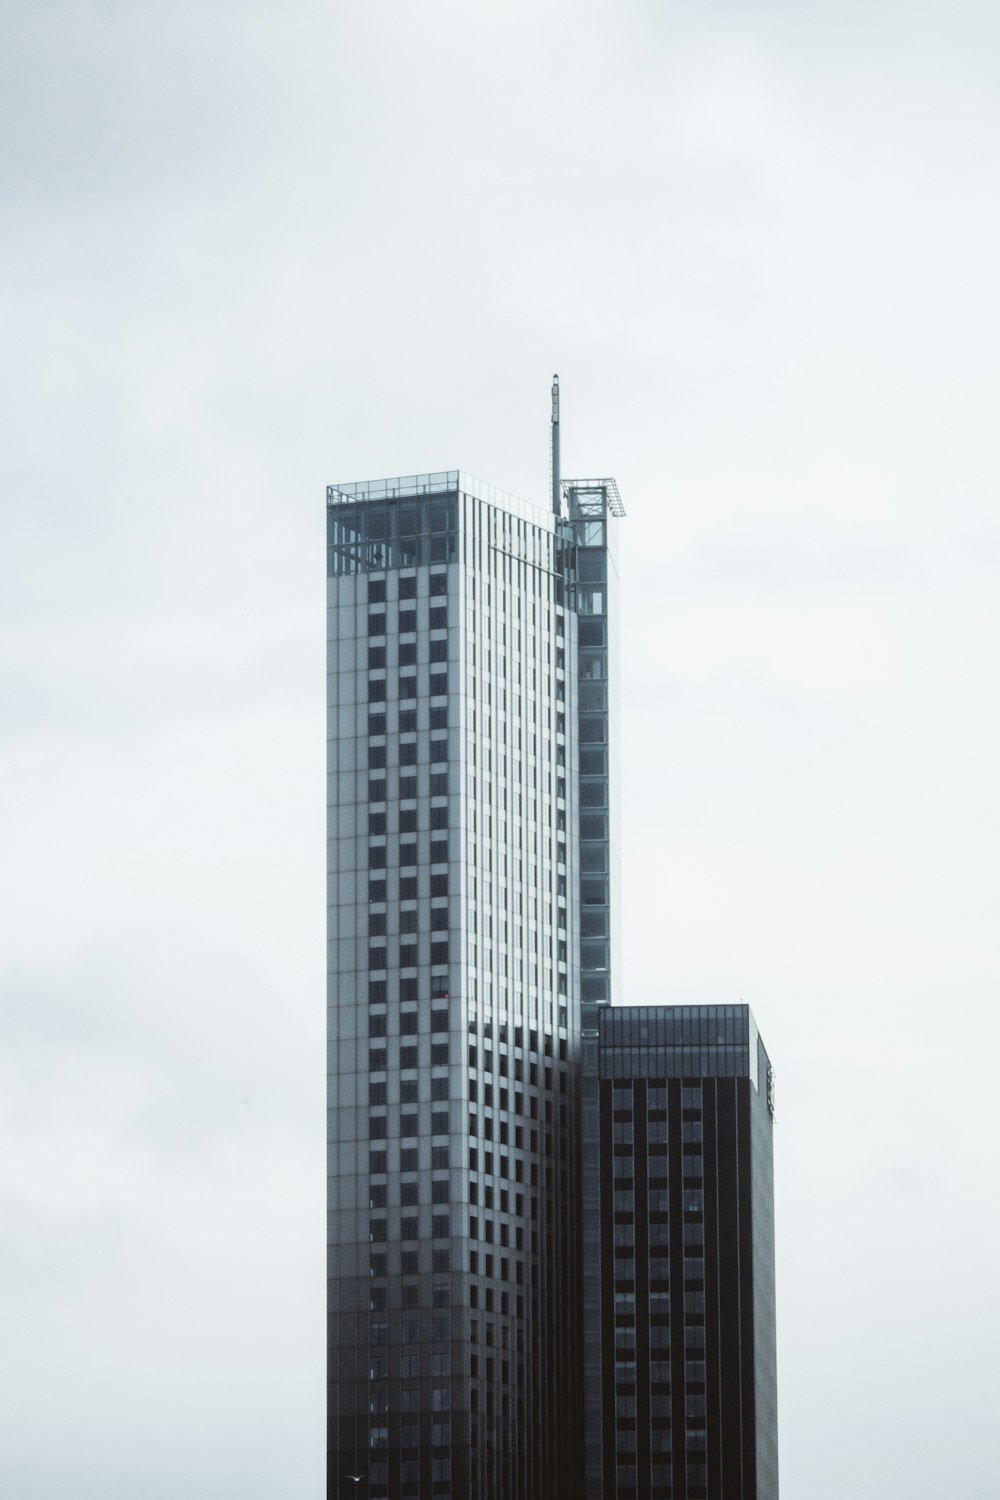 gray concrete building under white sky during daytime